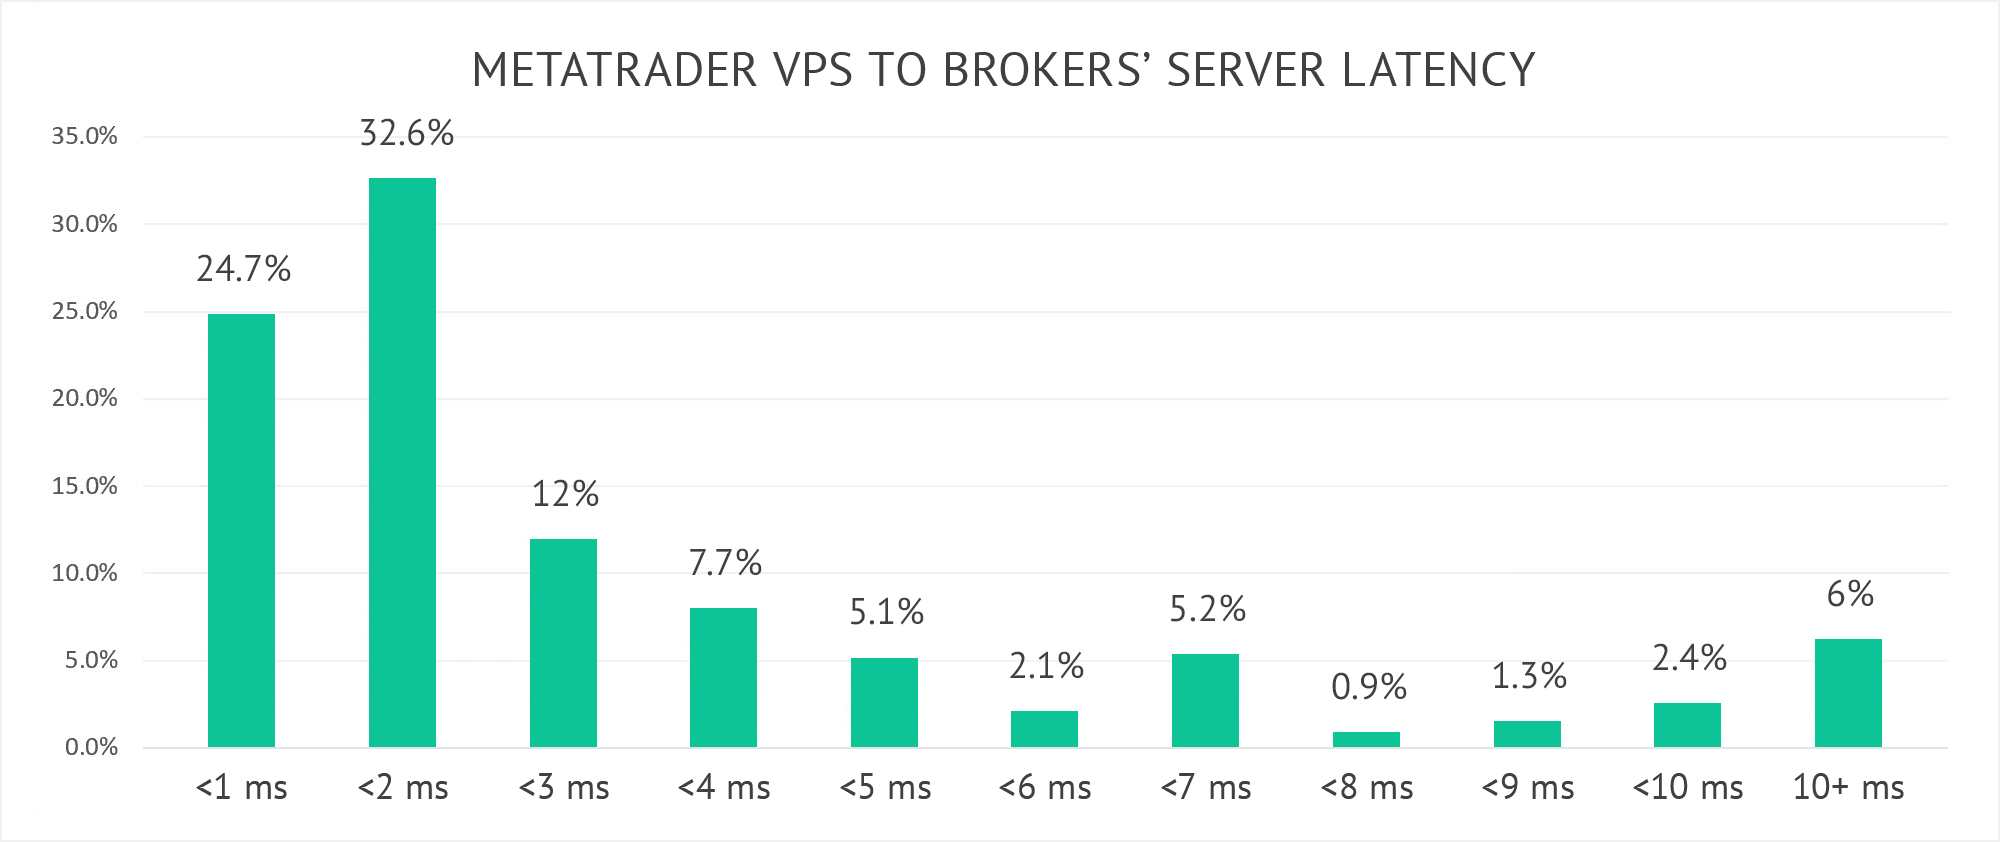 57% of broker servers can be accessed with a ping of less than 2 ms